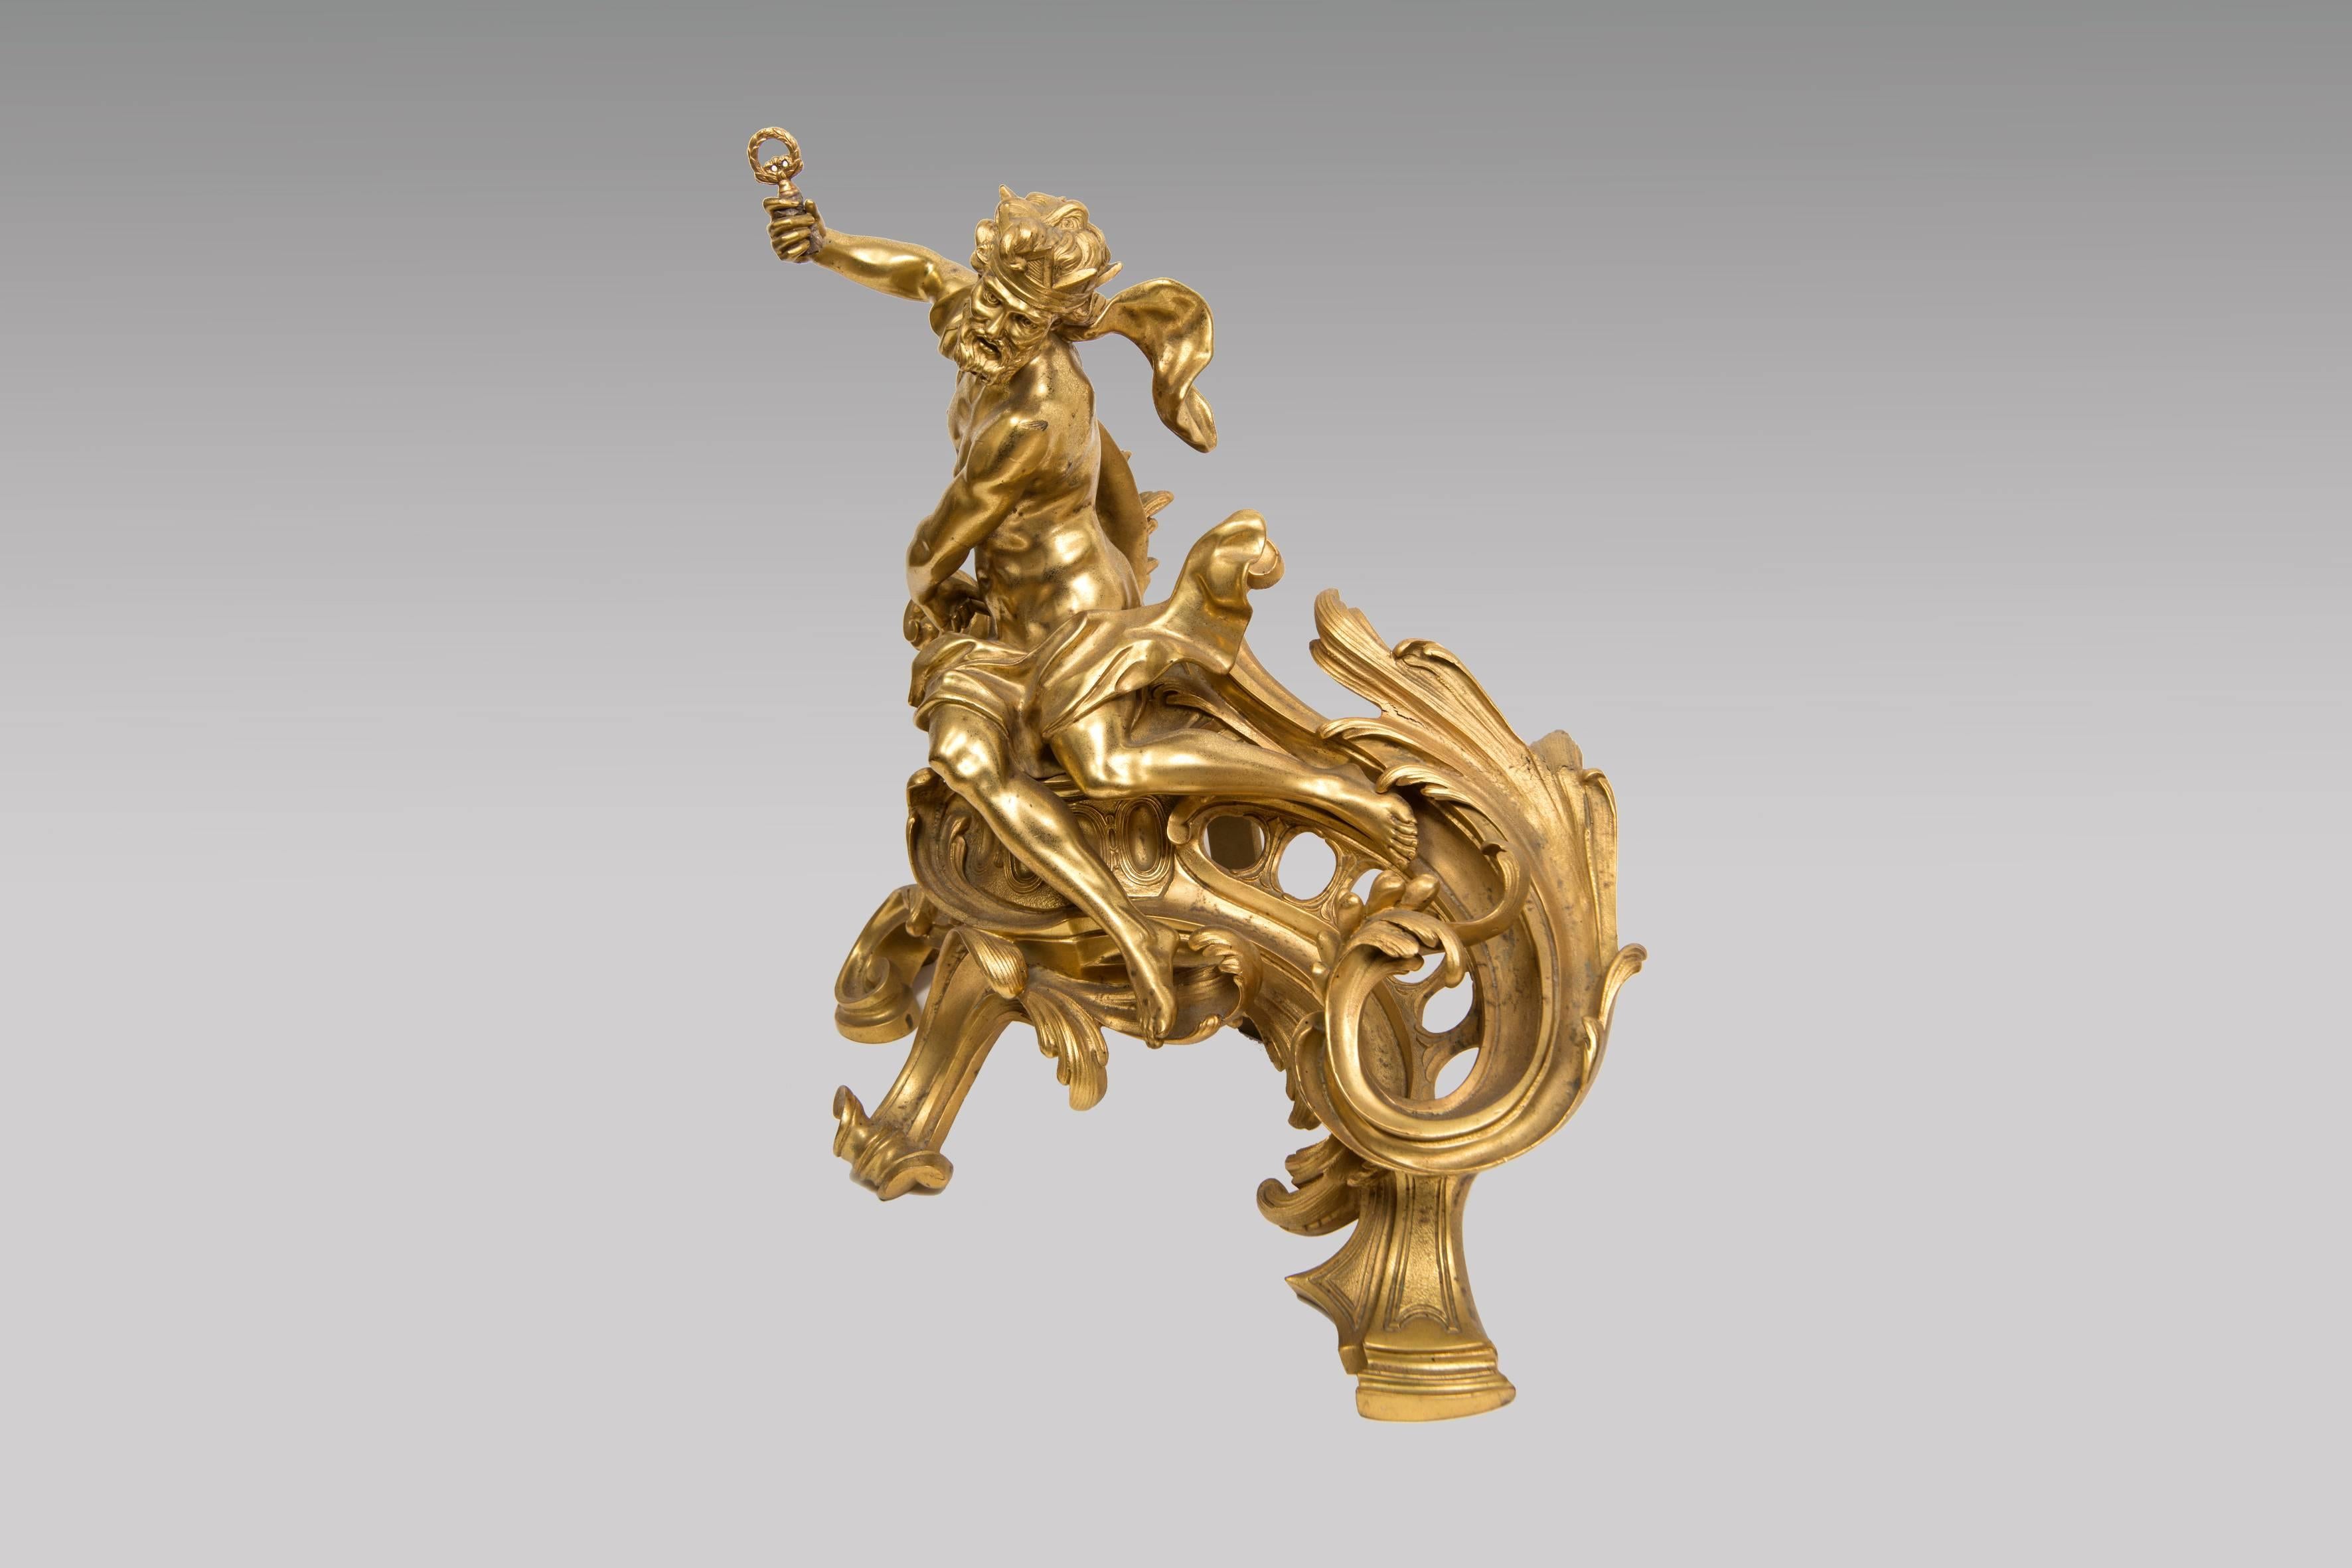 Exceptional pair of andirons In gilded bronze scrolls to de foliage decor from Neptune. Reproduced in the reference book by François Linke (1855-1946). F. Linke founded his studio in 1881 and moved Vendôme in 1900, when he received the gold medal